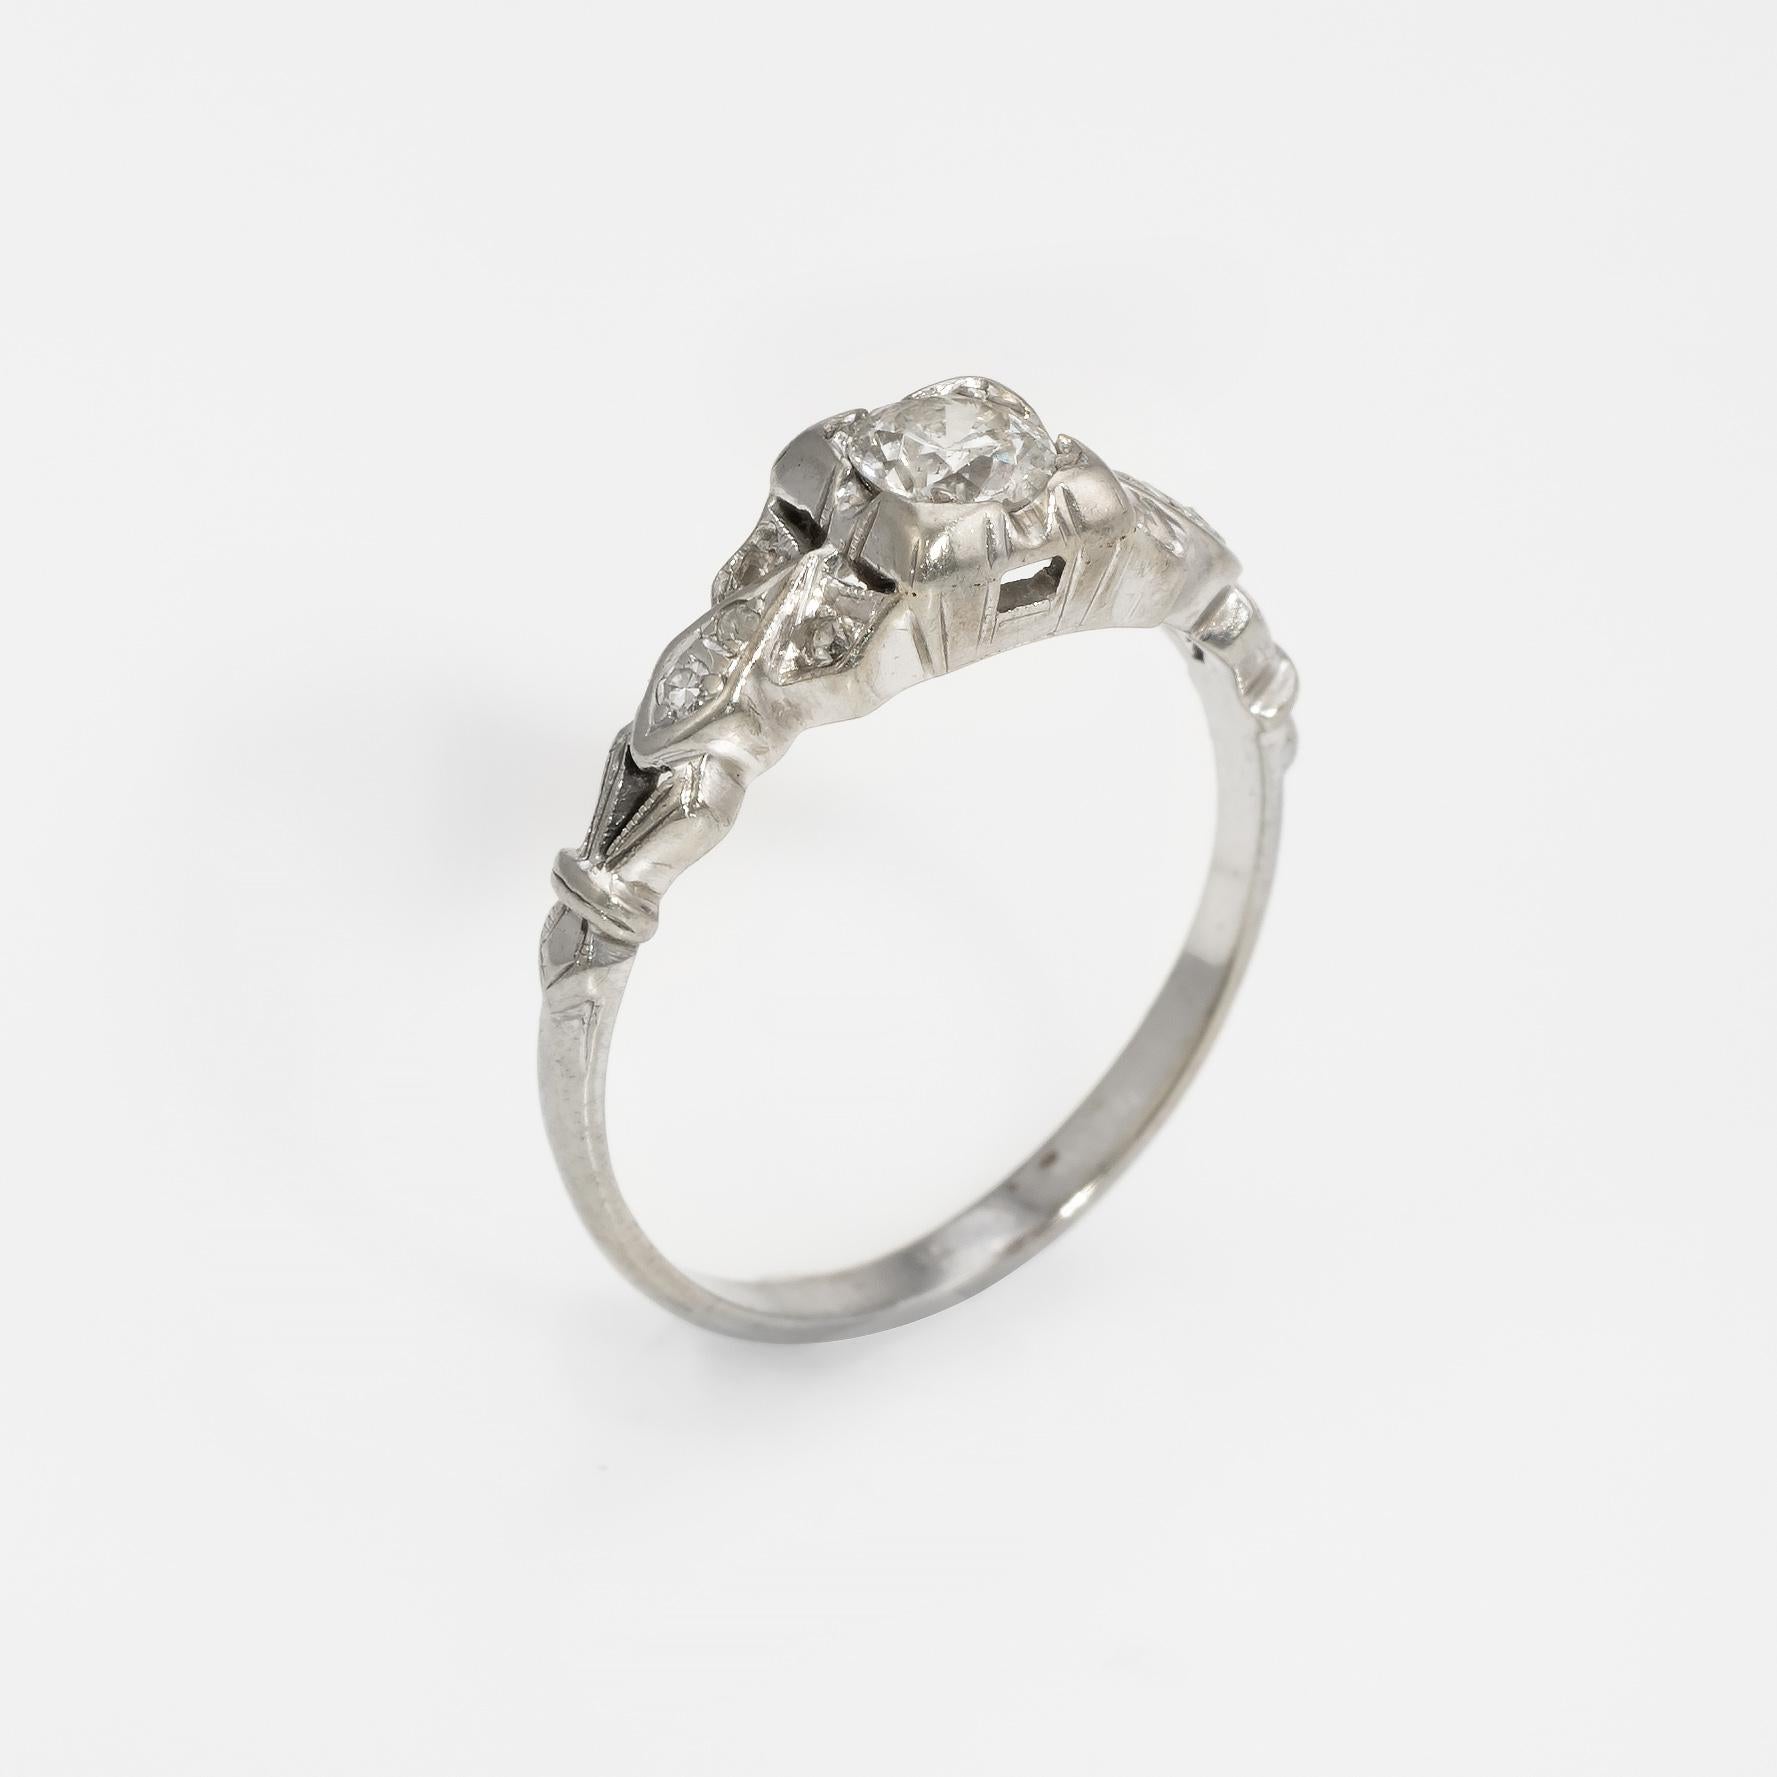 Finely detailed vintage Art Deco era ring (circa 1920s to 1930s), crafted in 14 karat white gold. 

Centrally mounted estimated at 0.30 carat old European cut diamond is accented with an estimated 0.08 carats of single cut diamonds. The total